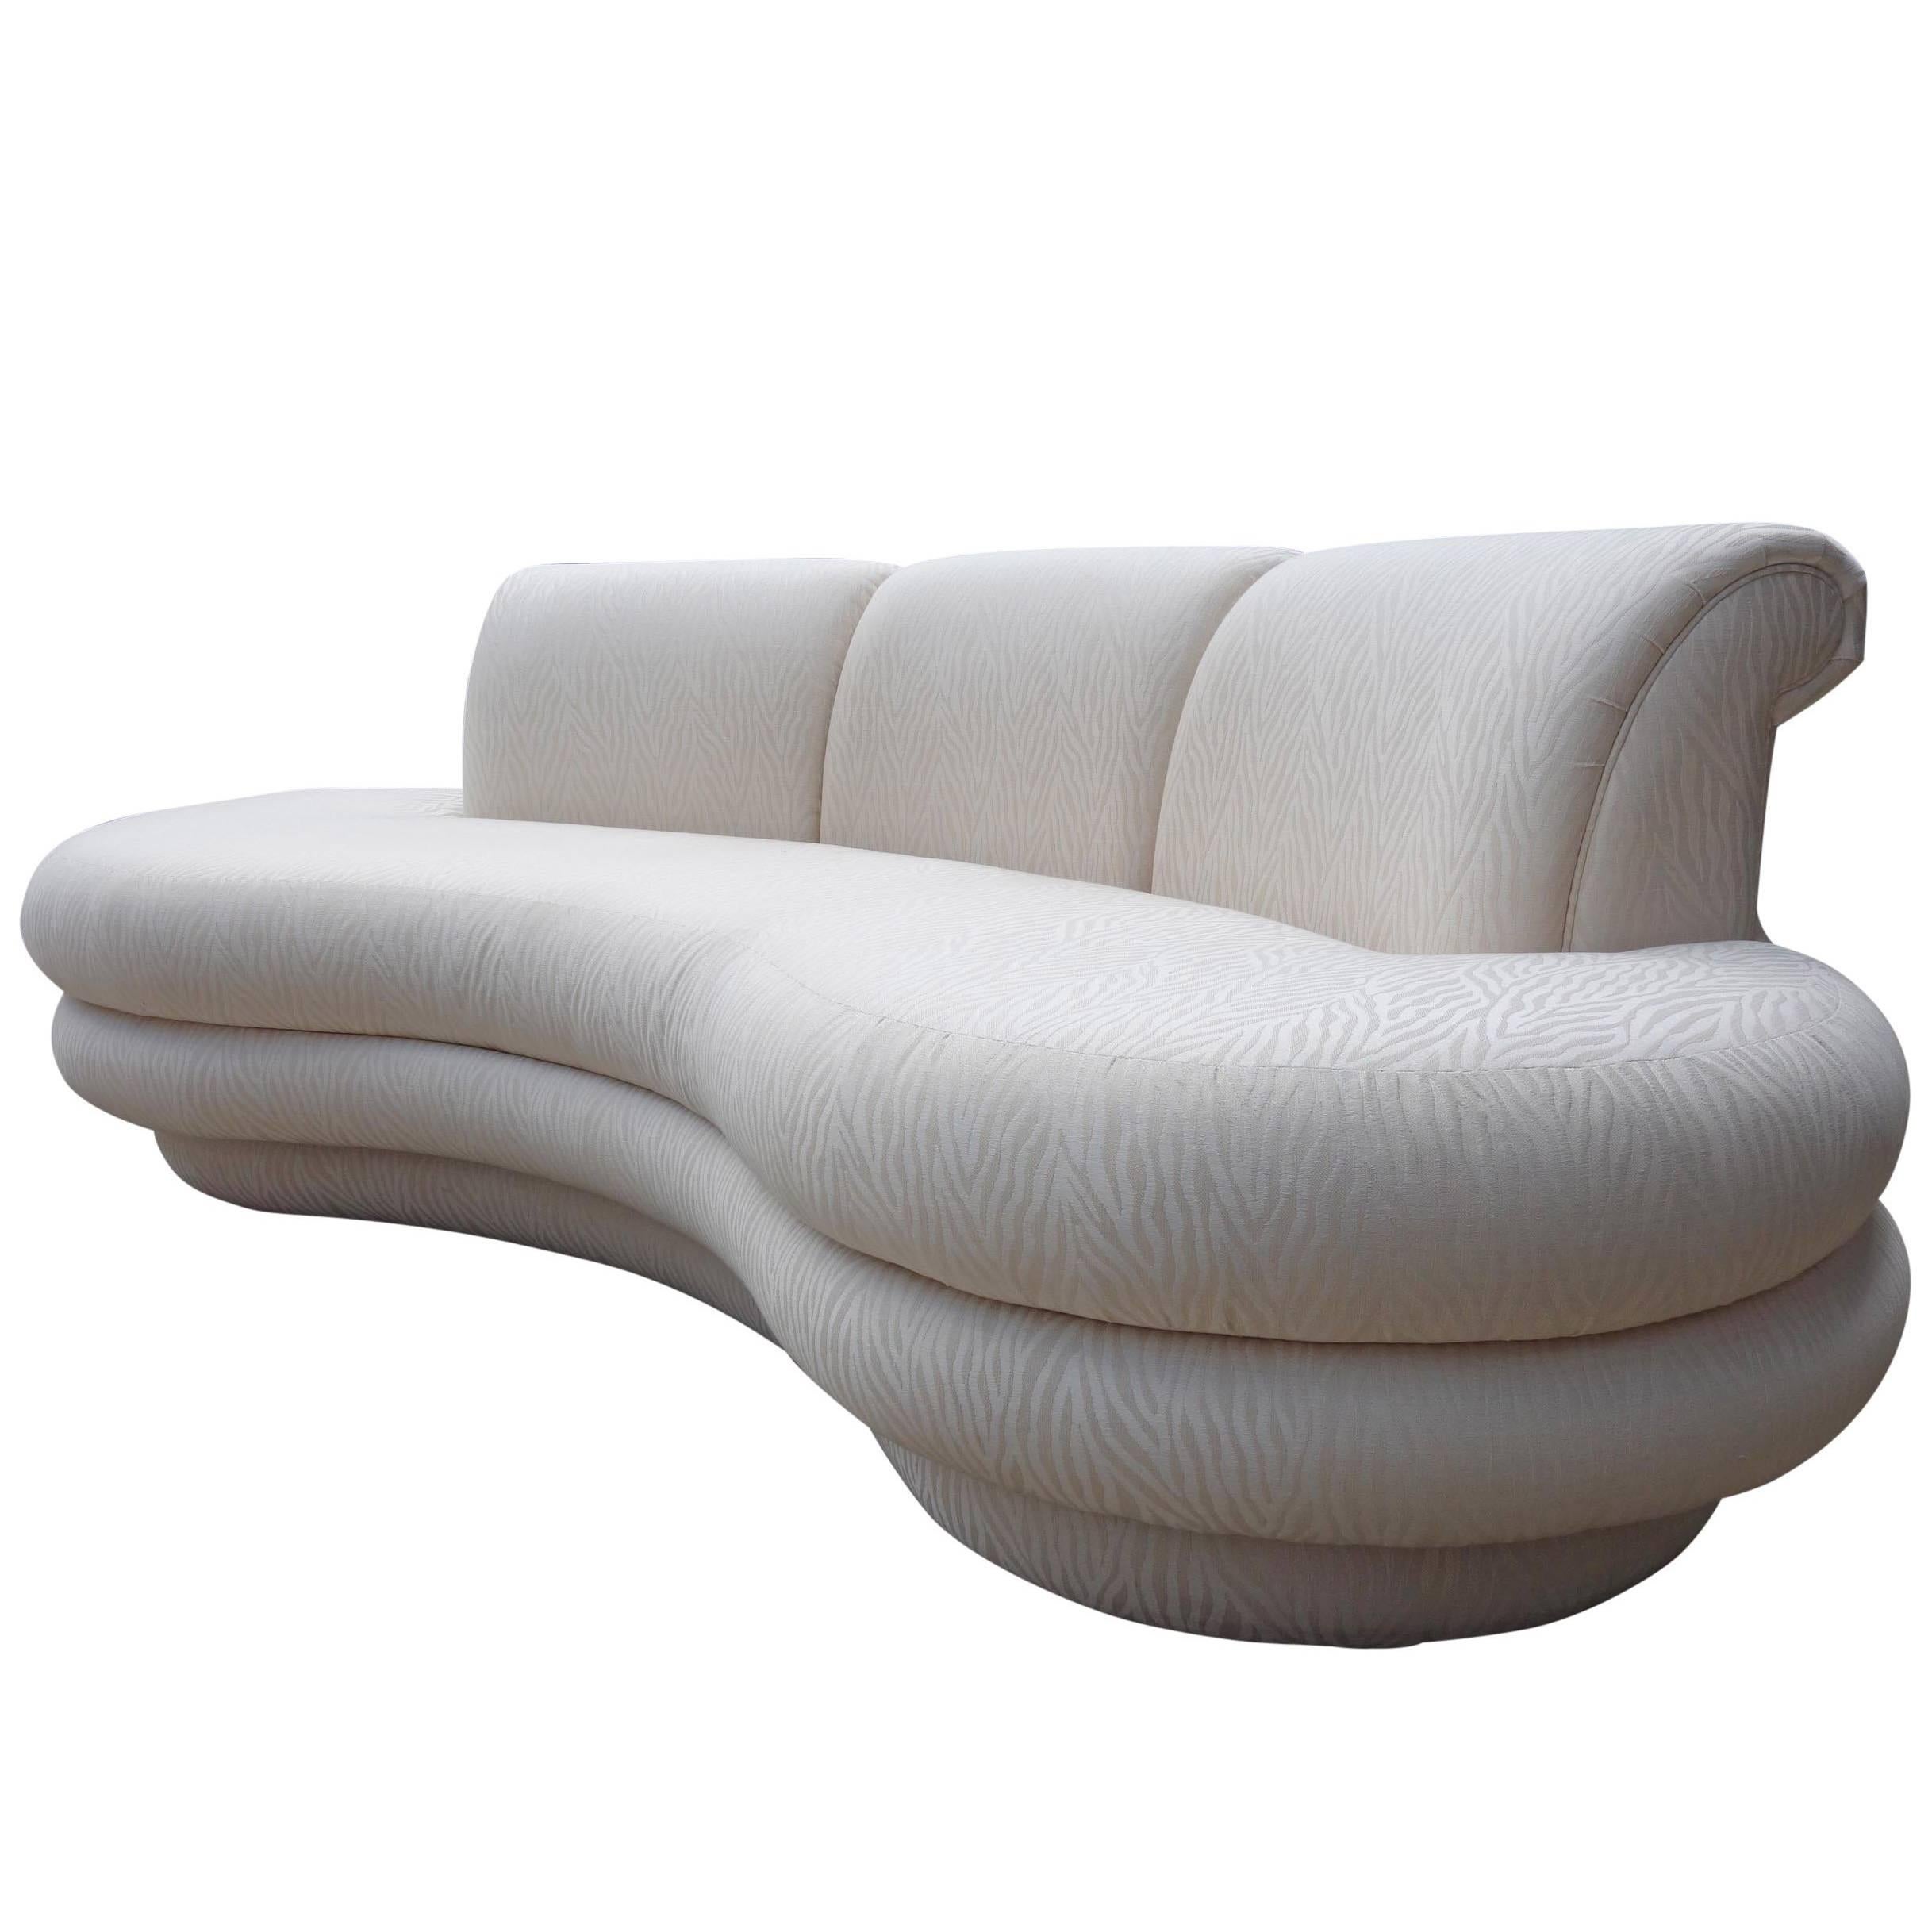 Adrian Pearsall Kidney Shaped / Curved Sofa for Comfort Designs